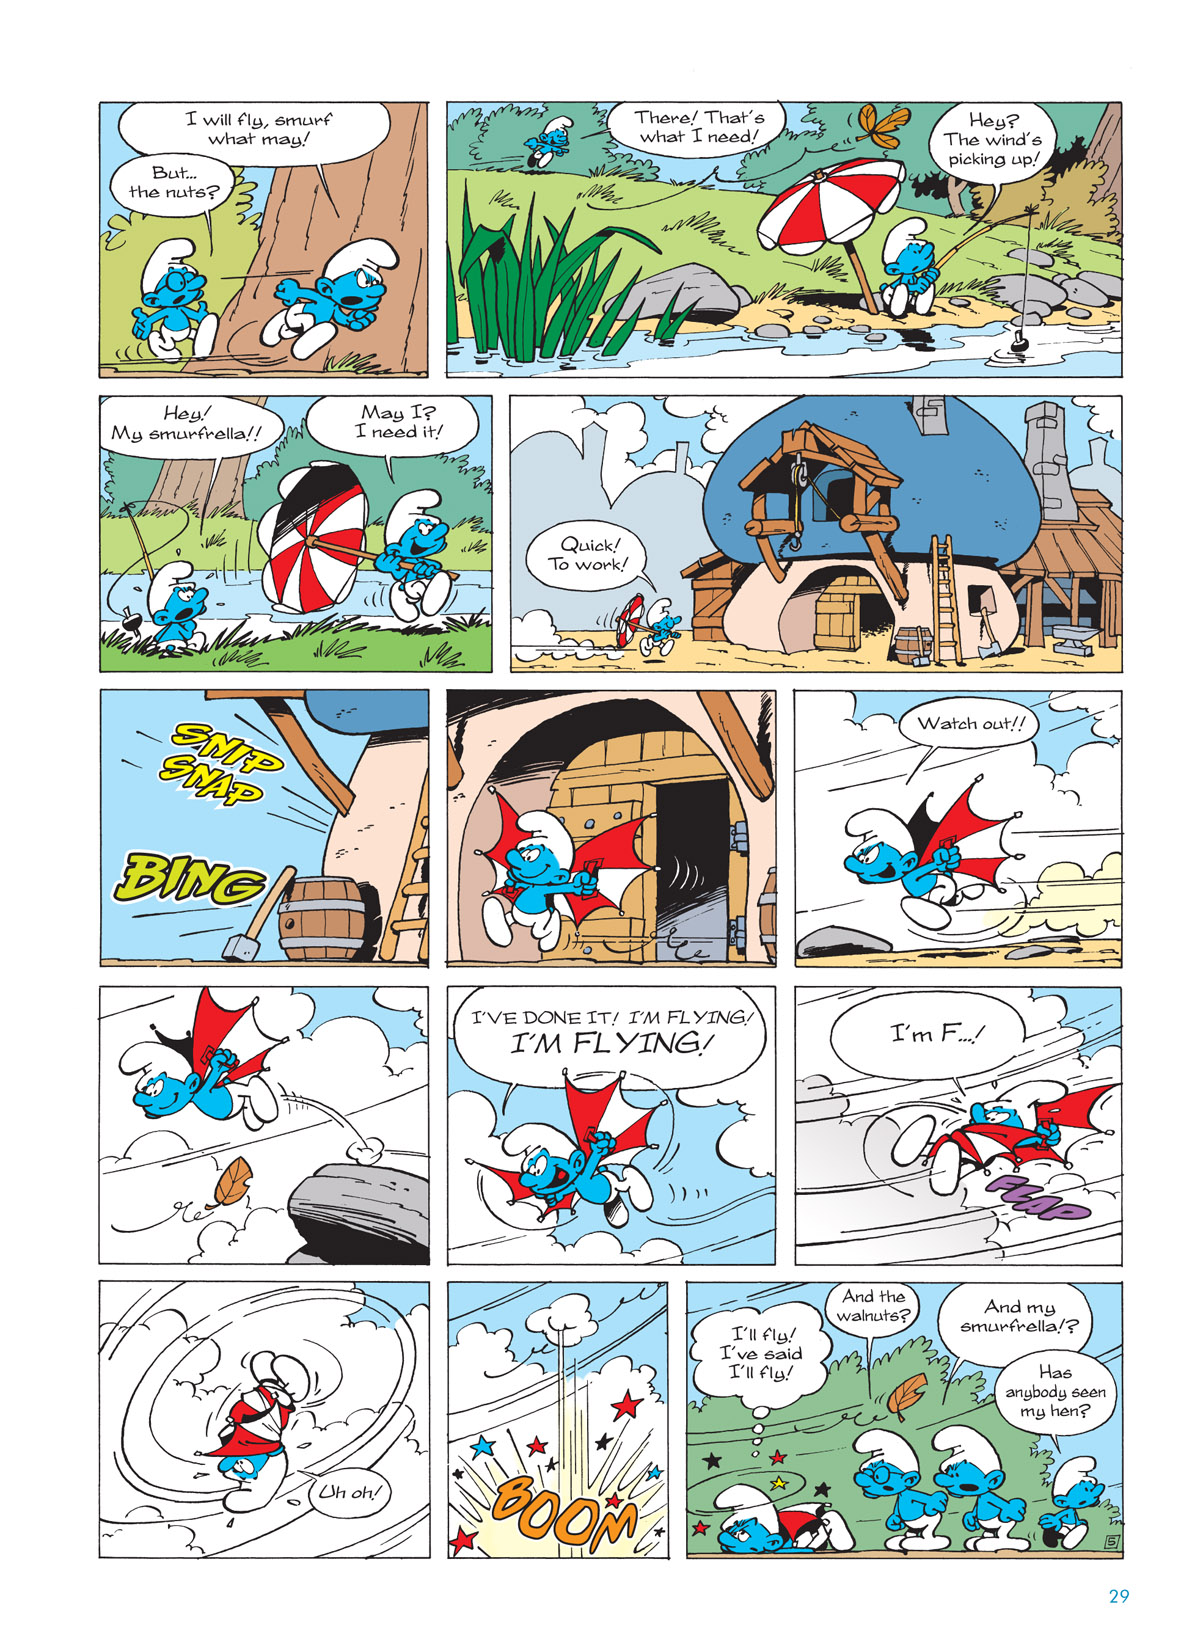 Read online The Smurfs comic -  Issue #1 - 29